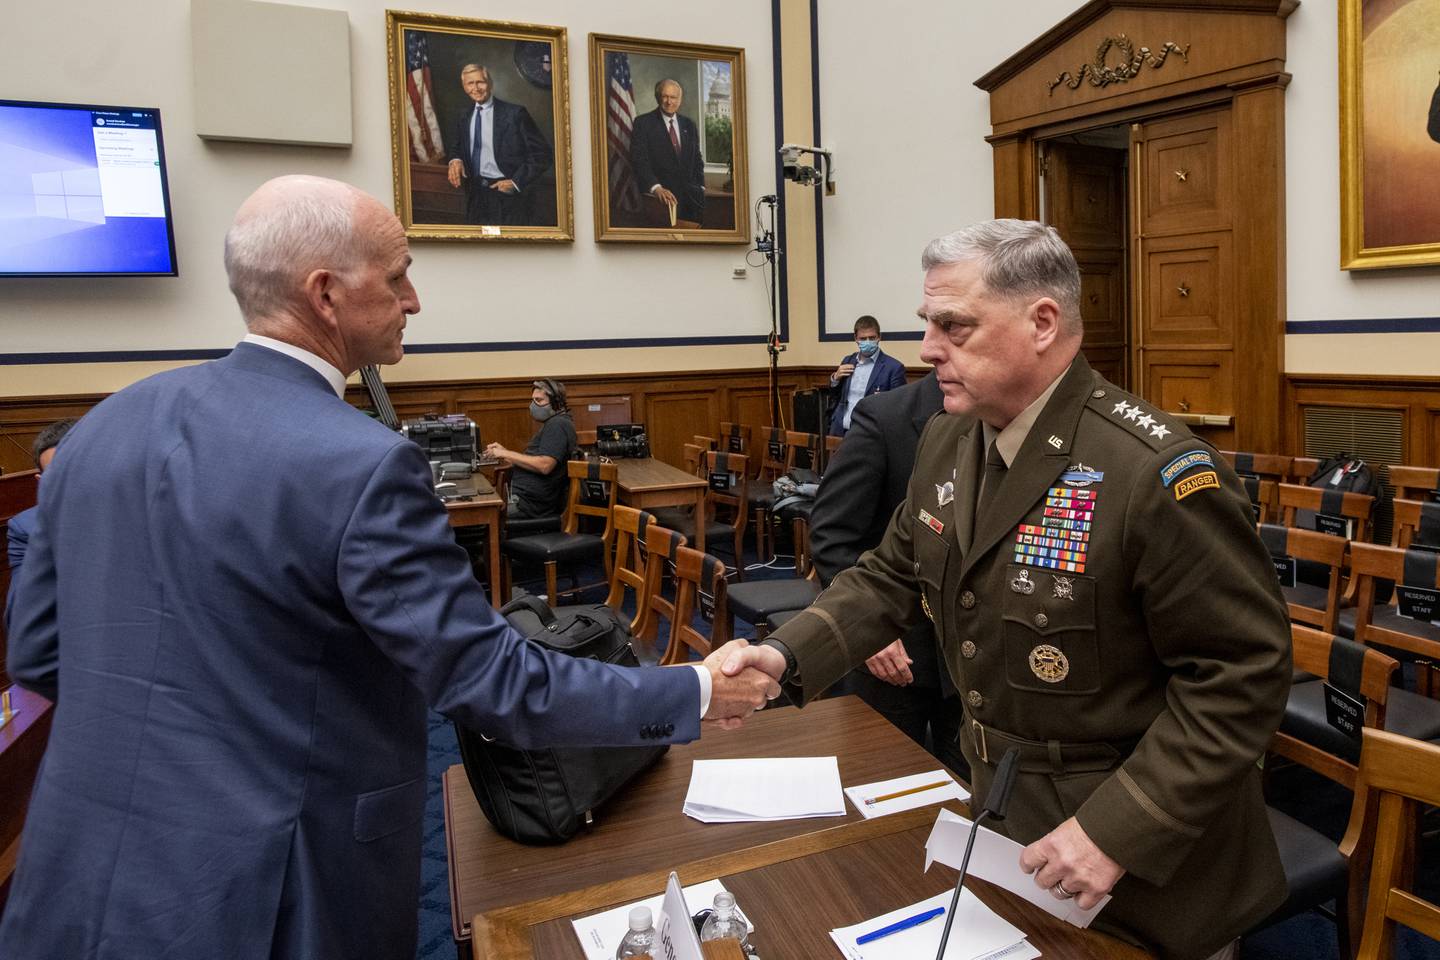 Adam Smith greets Chairman of the Joint Chiefs Gen Mark Milley after a House armed services committee hearing on Afghanistan. AP